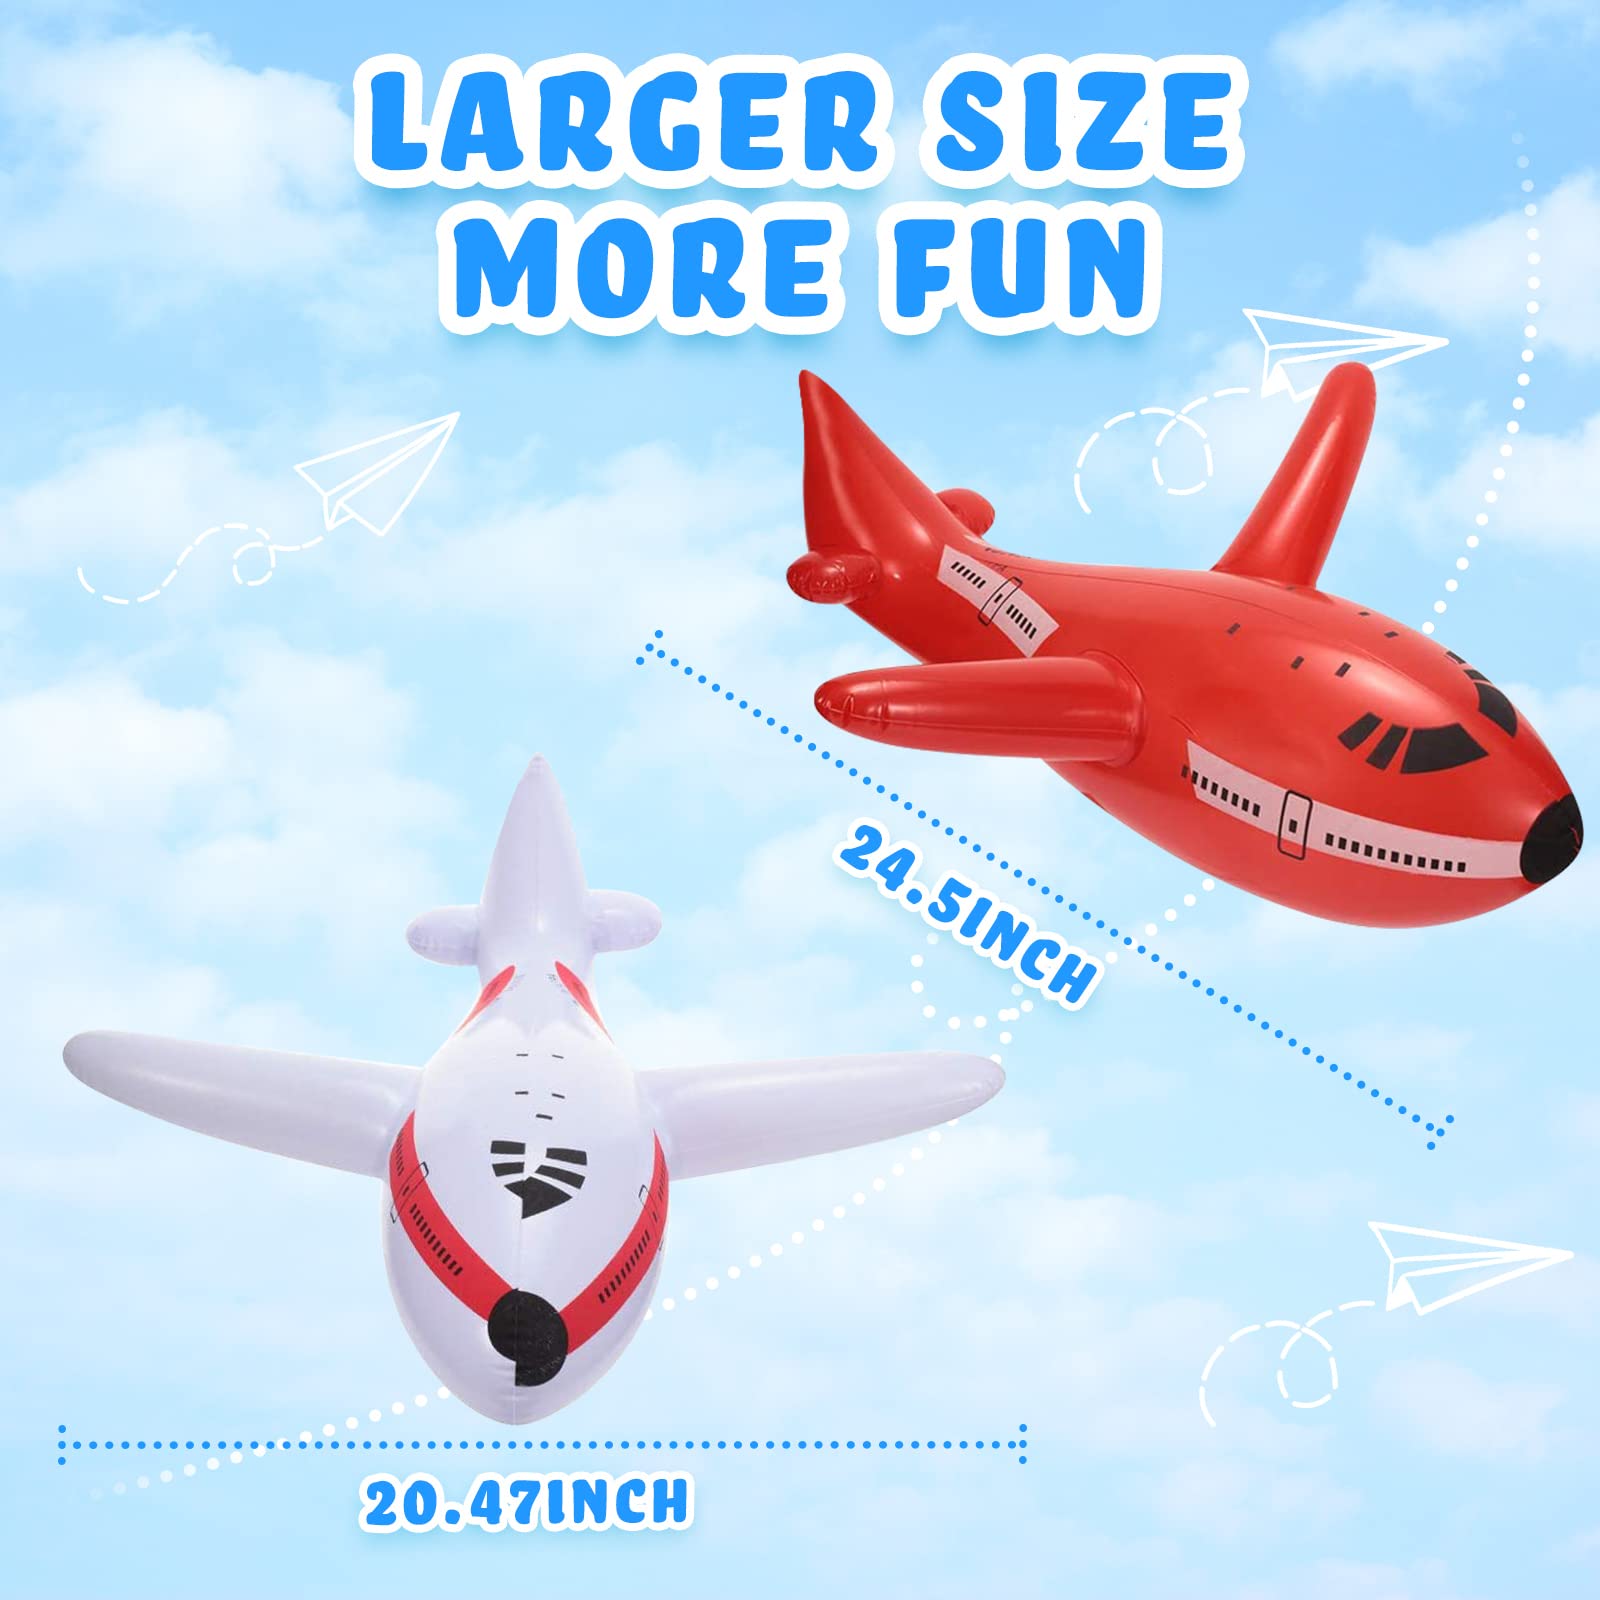 6 Pieces Inflatable Airplanes Aircraft Inflates Plane Inflated Toys for Kids Birthday Shower Party Decoration Supplies (Large)